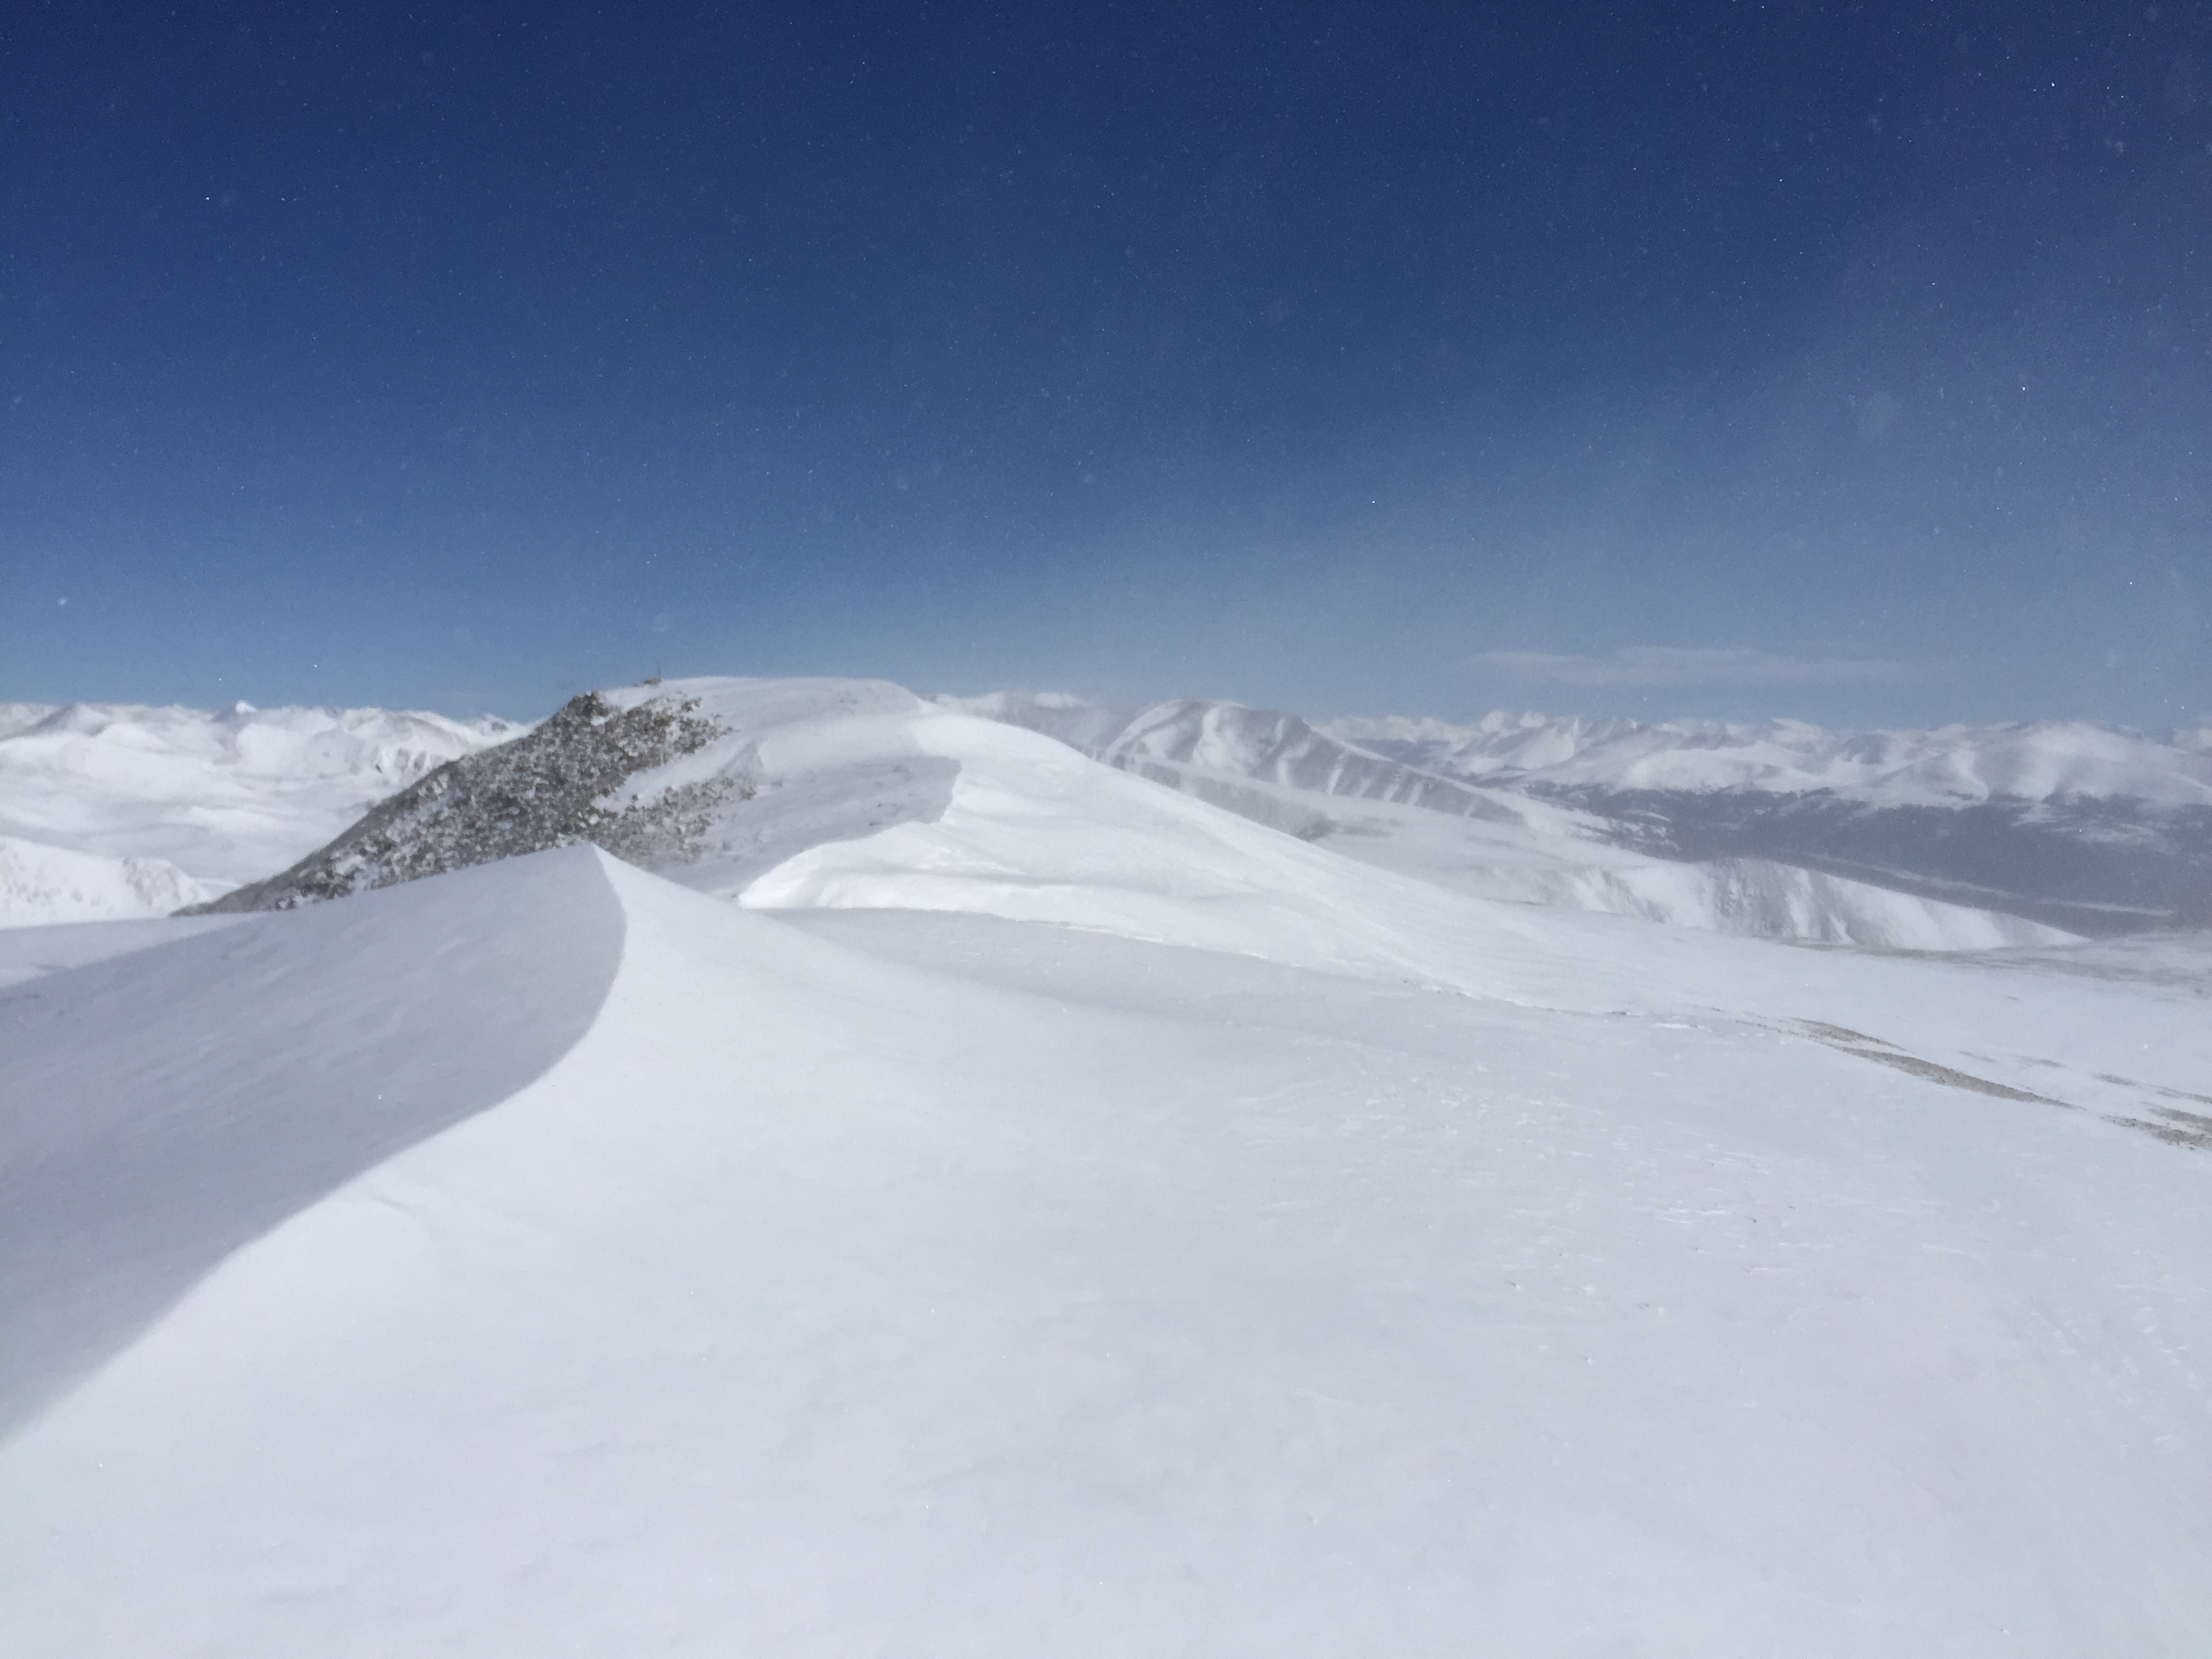 Cool looking snow drifts along the summit. Winds picked up more once we headed down.